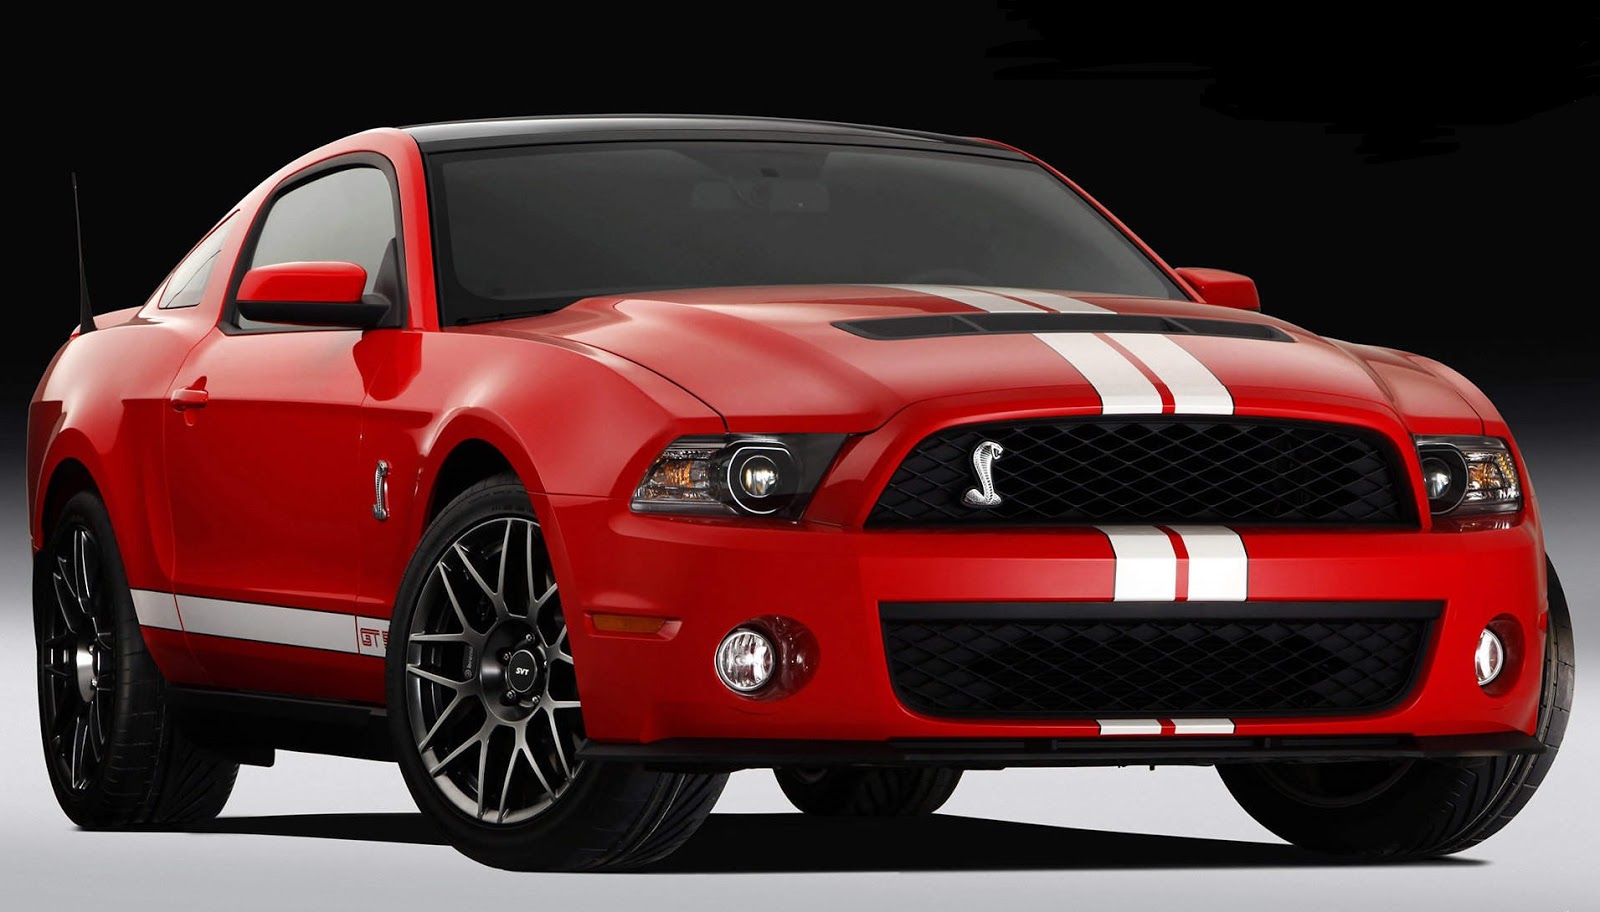 Spesifikasi Mobil Sport Ford Mustang Shelby GT500 Abah Supercars